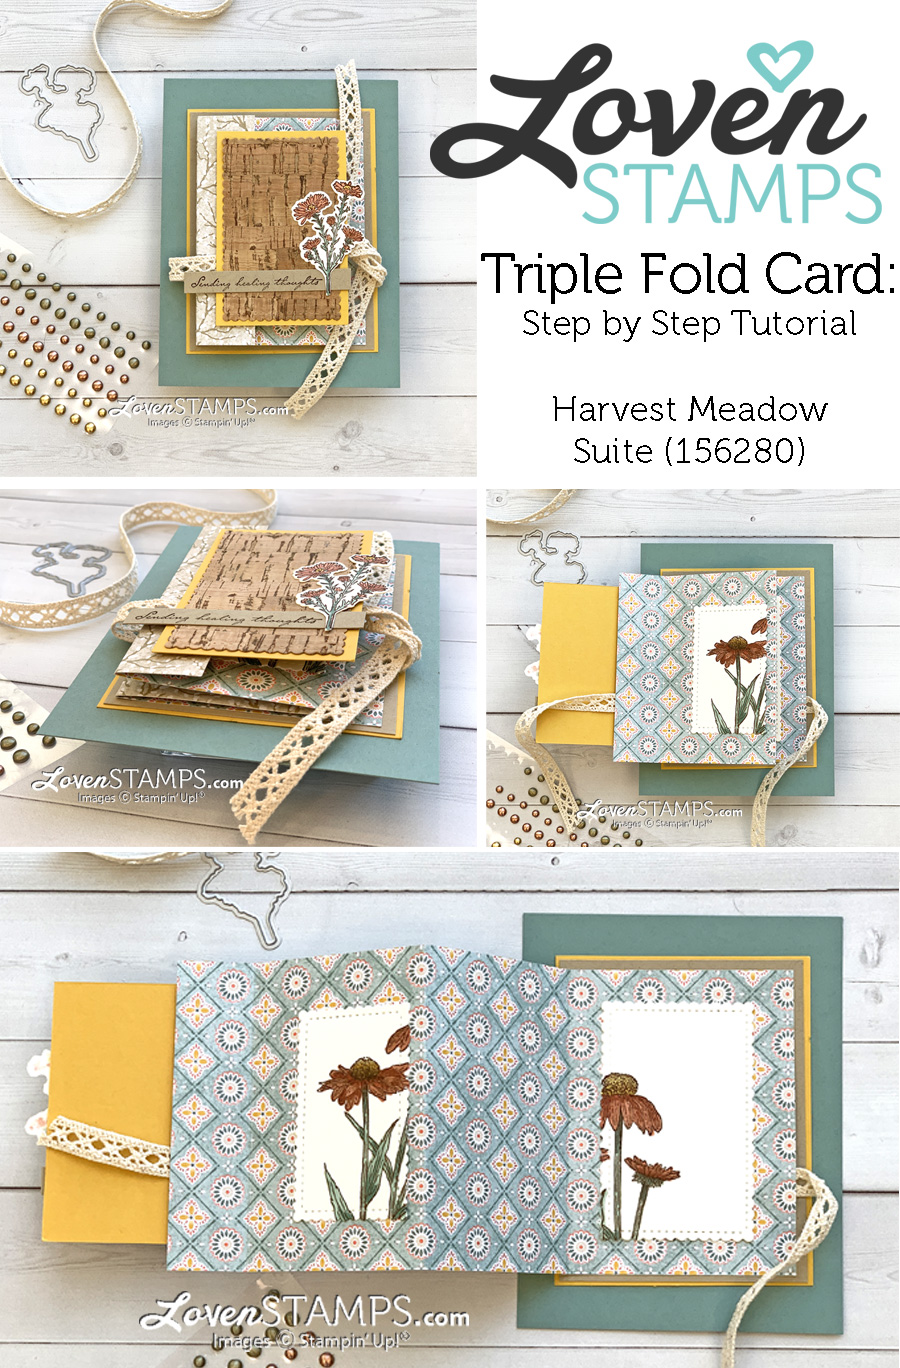 natures-harvest-meadow-triple-fold-card-idea-cork-dspcardbase-stampin-up-supplies-tutorial